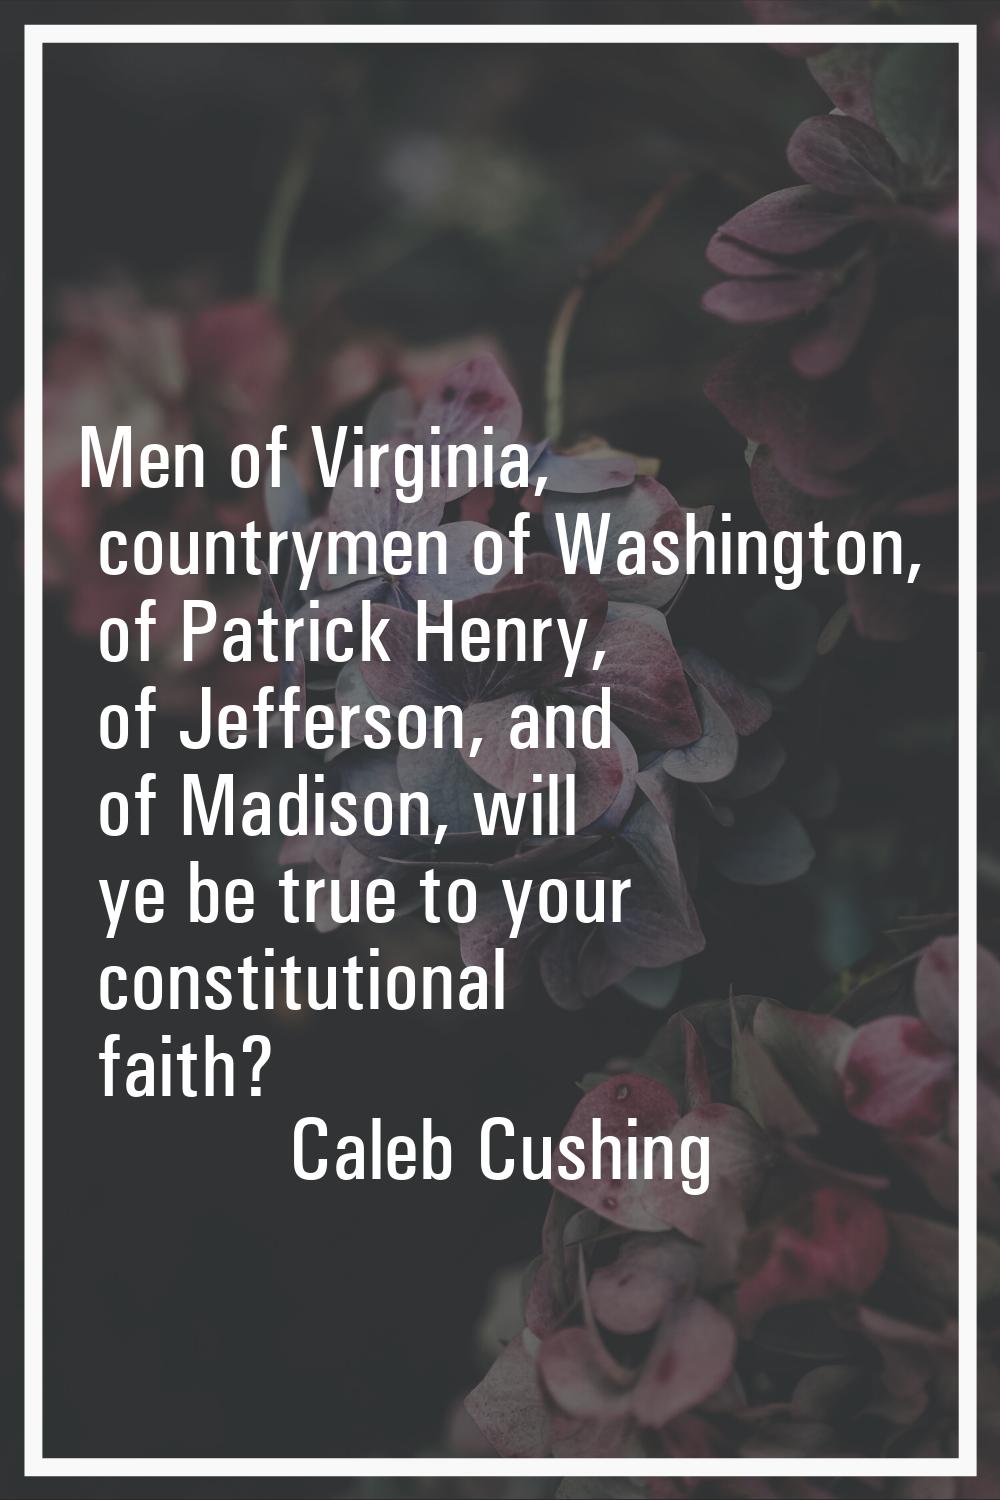 Men of Virginia, countrymen of Washington, of Patrick Henry, of Jefferson, and of Madison, will ye 